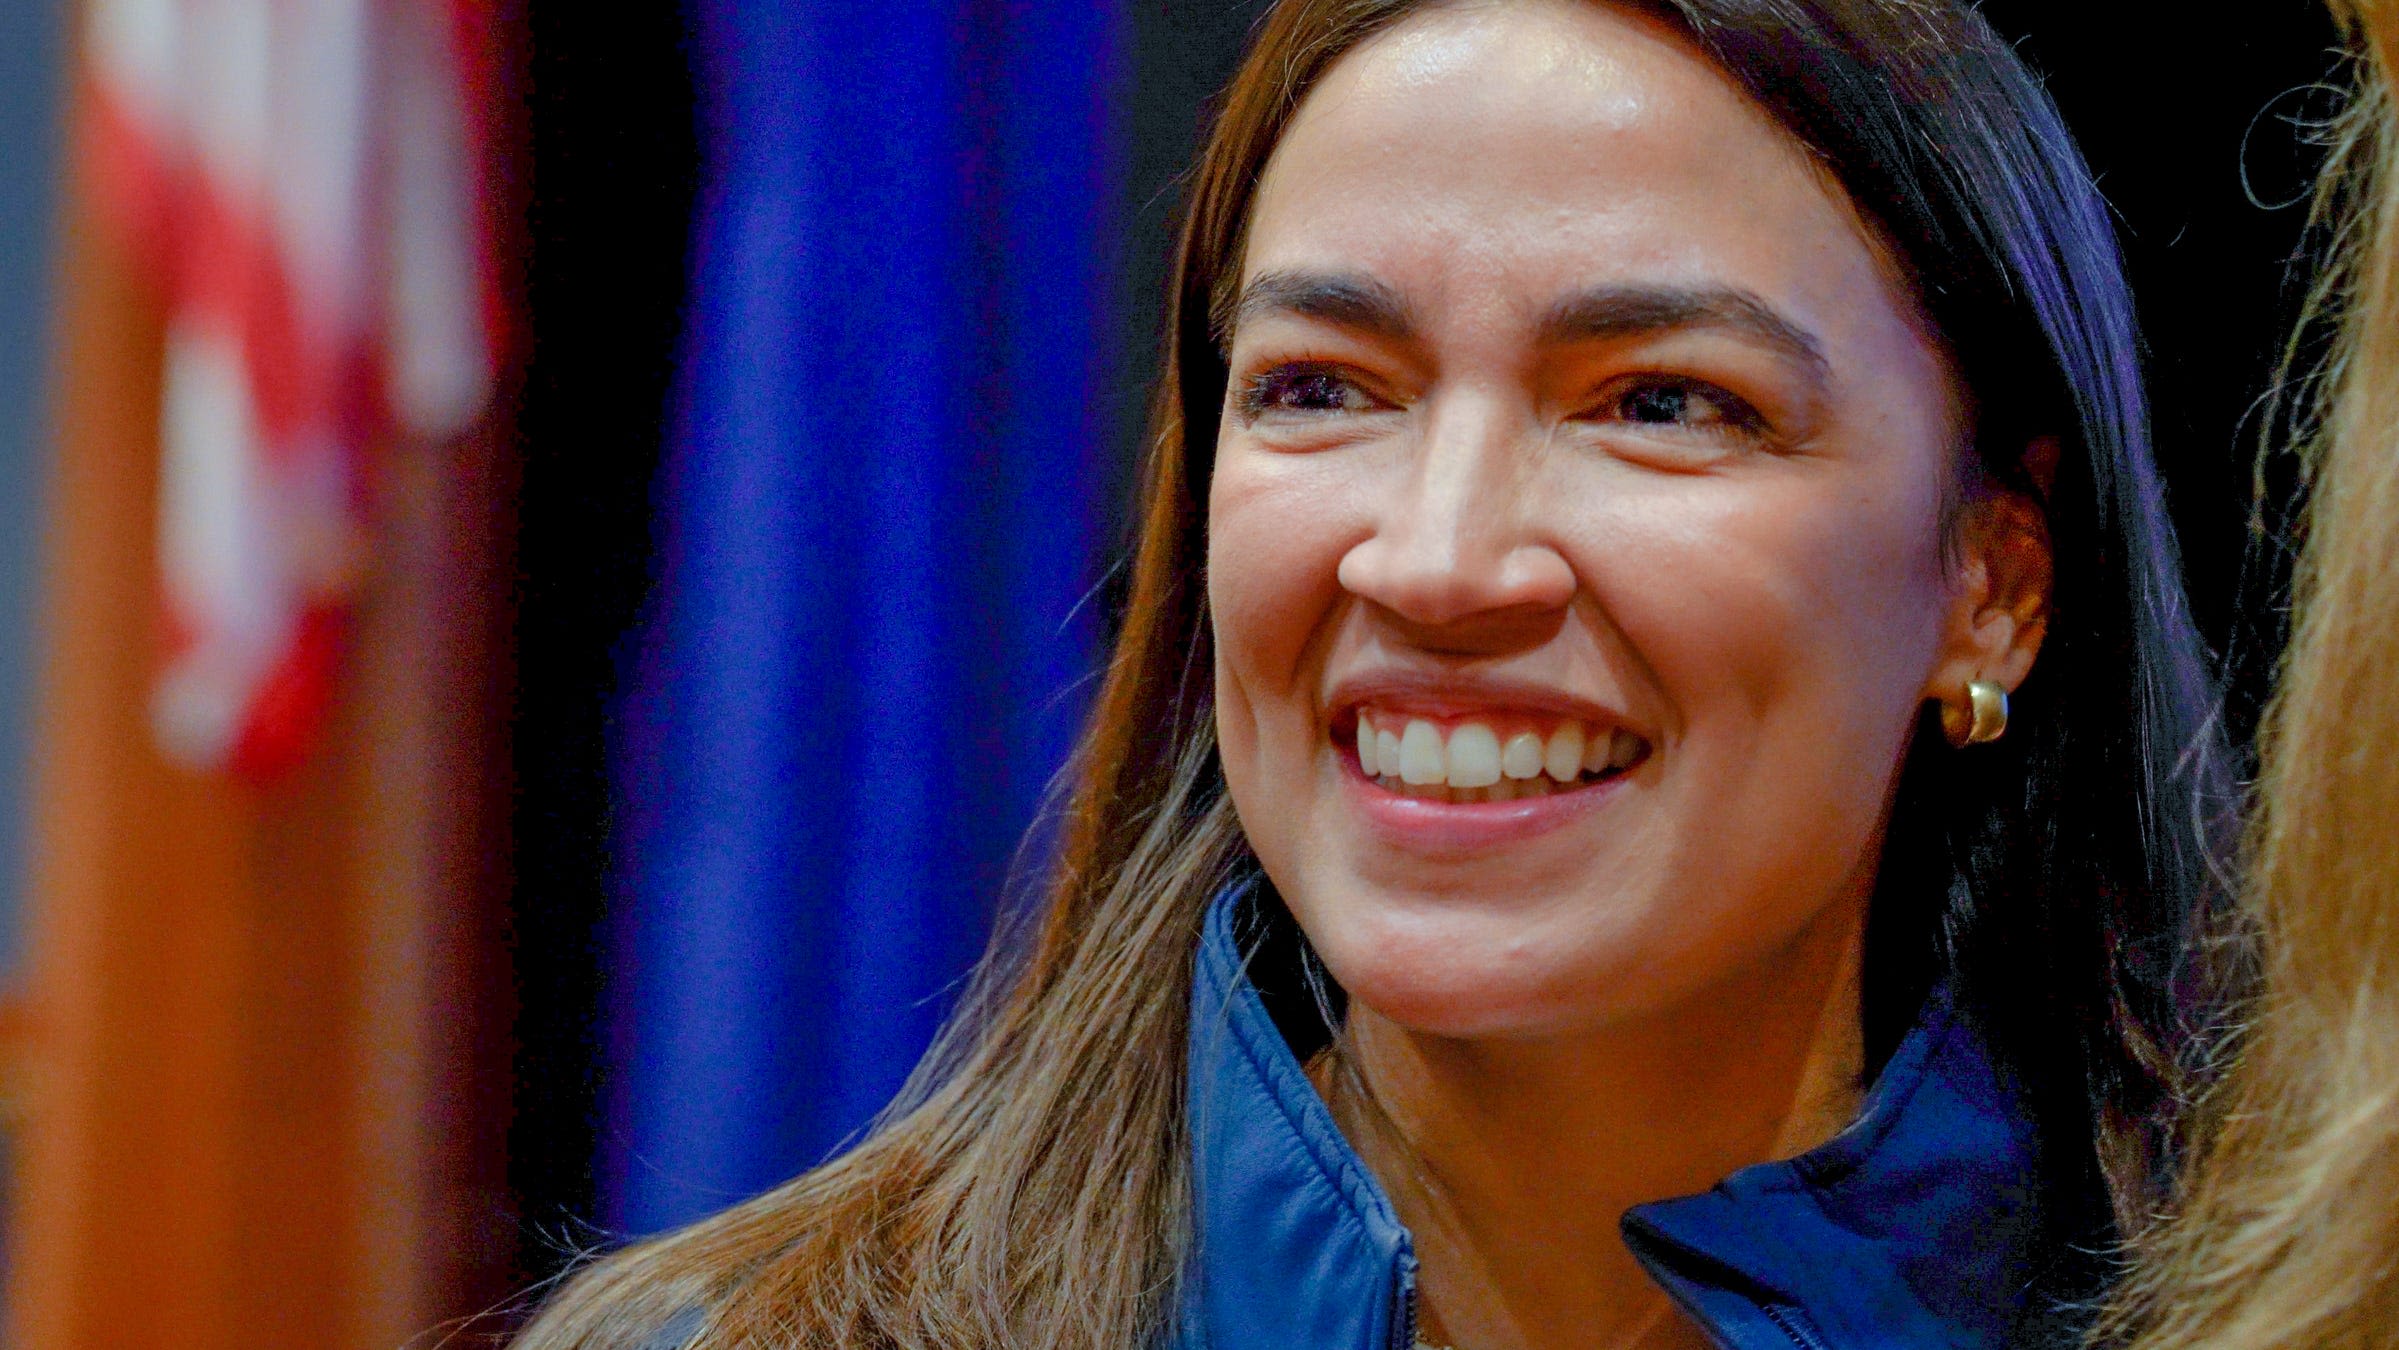 'We have to run like all of our lives depend on it': AOC warns Dems of tough road ahead